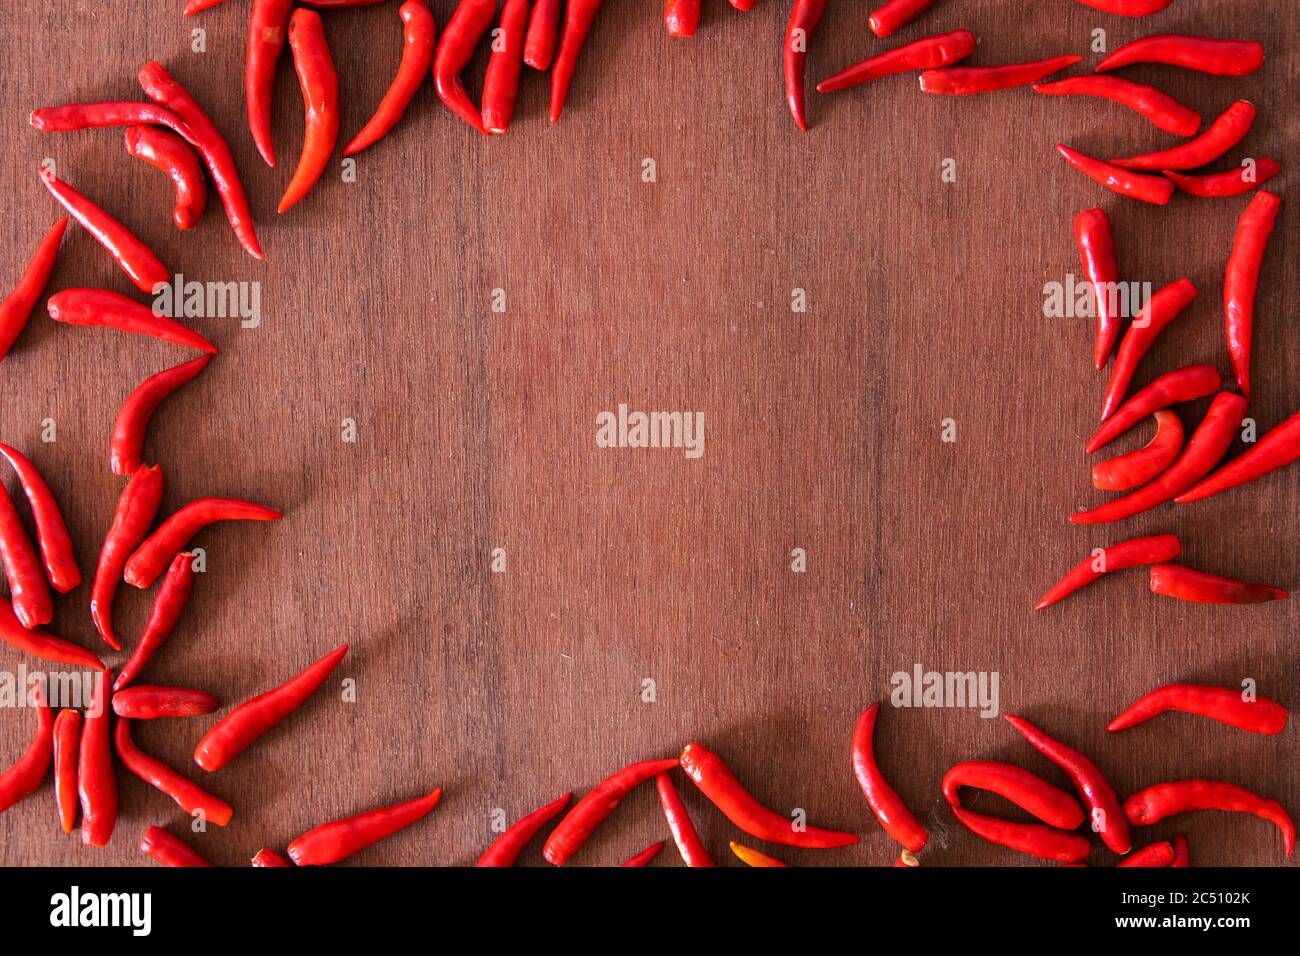 Red peppers on the wood floor,Free space Enter text and images. Stock Photo